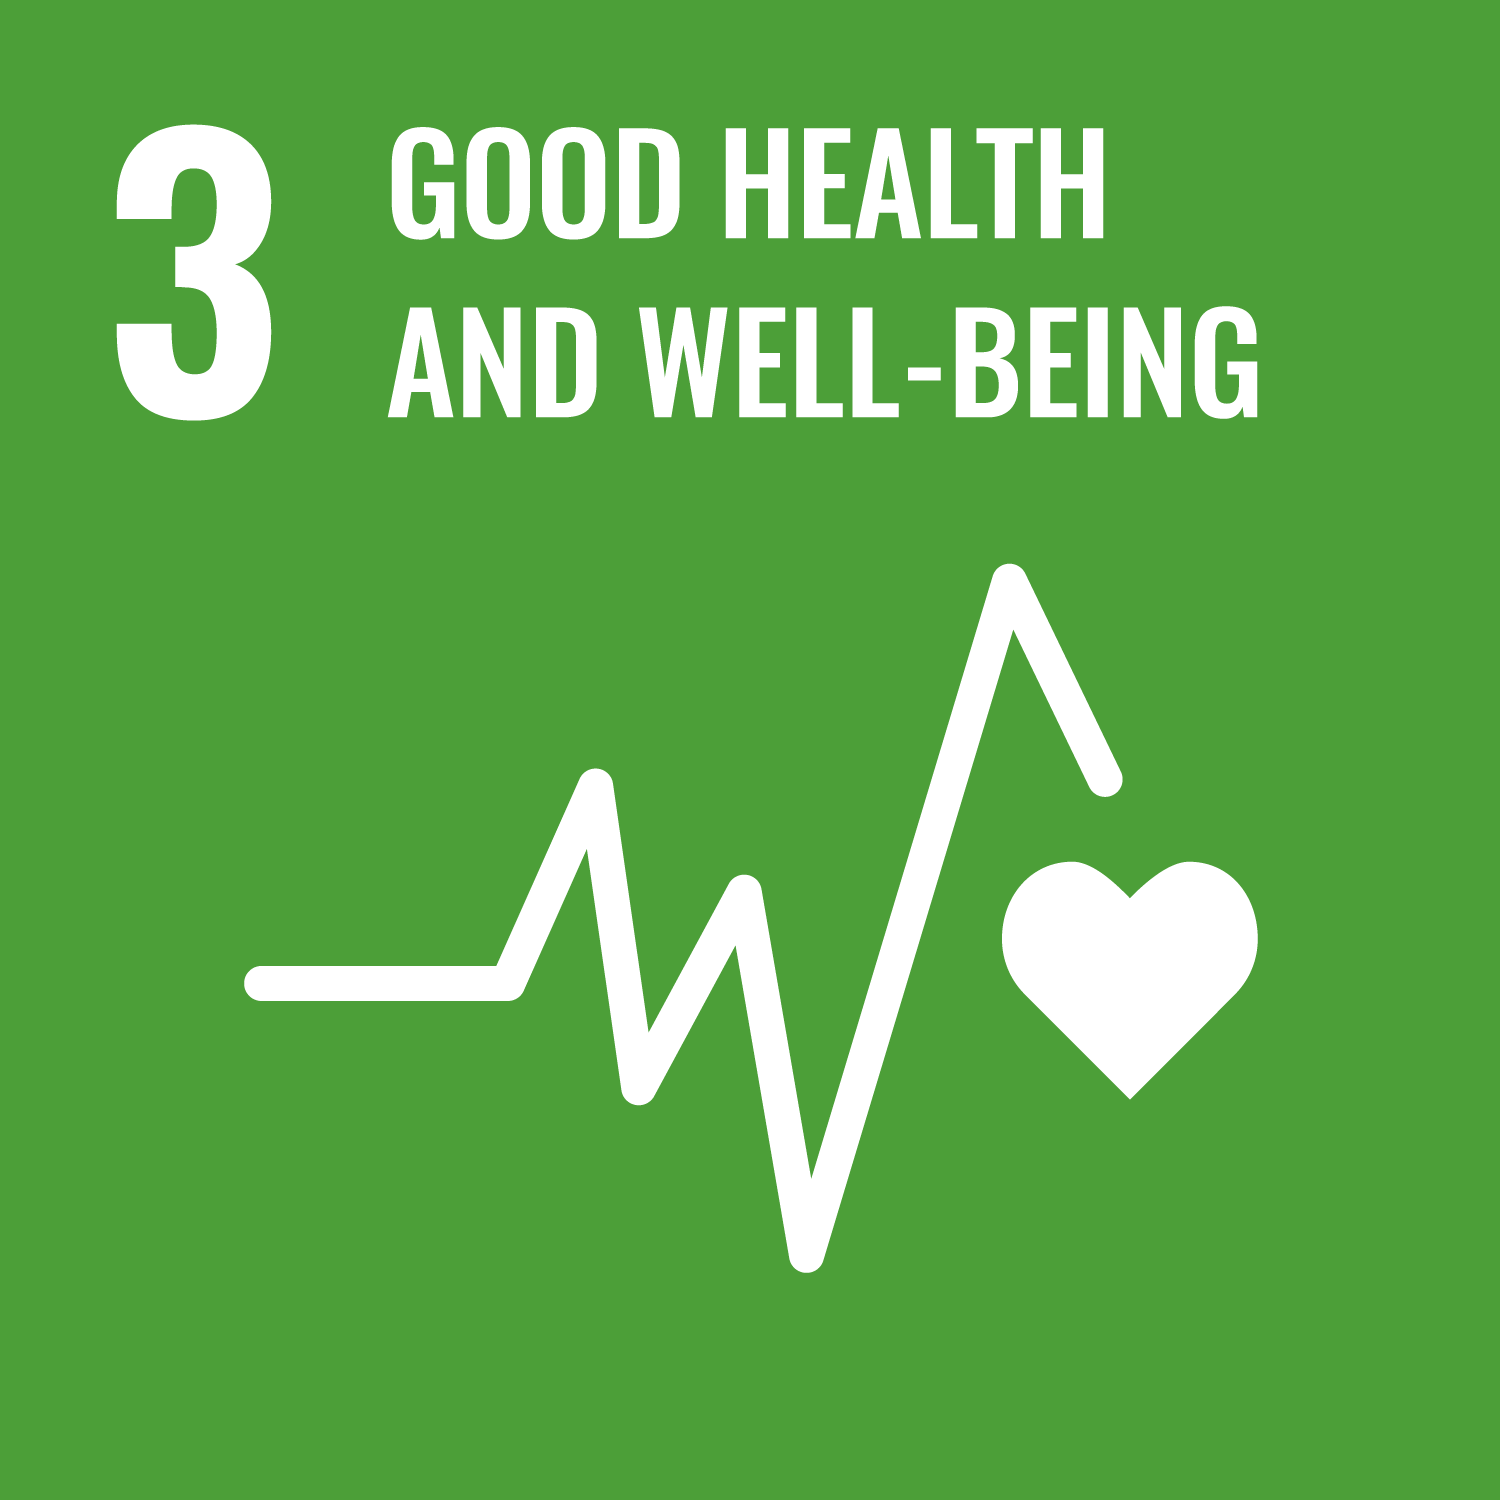 UN Agenda 2030 SDG 3 Good health and well-being icon.